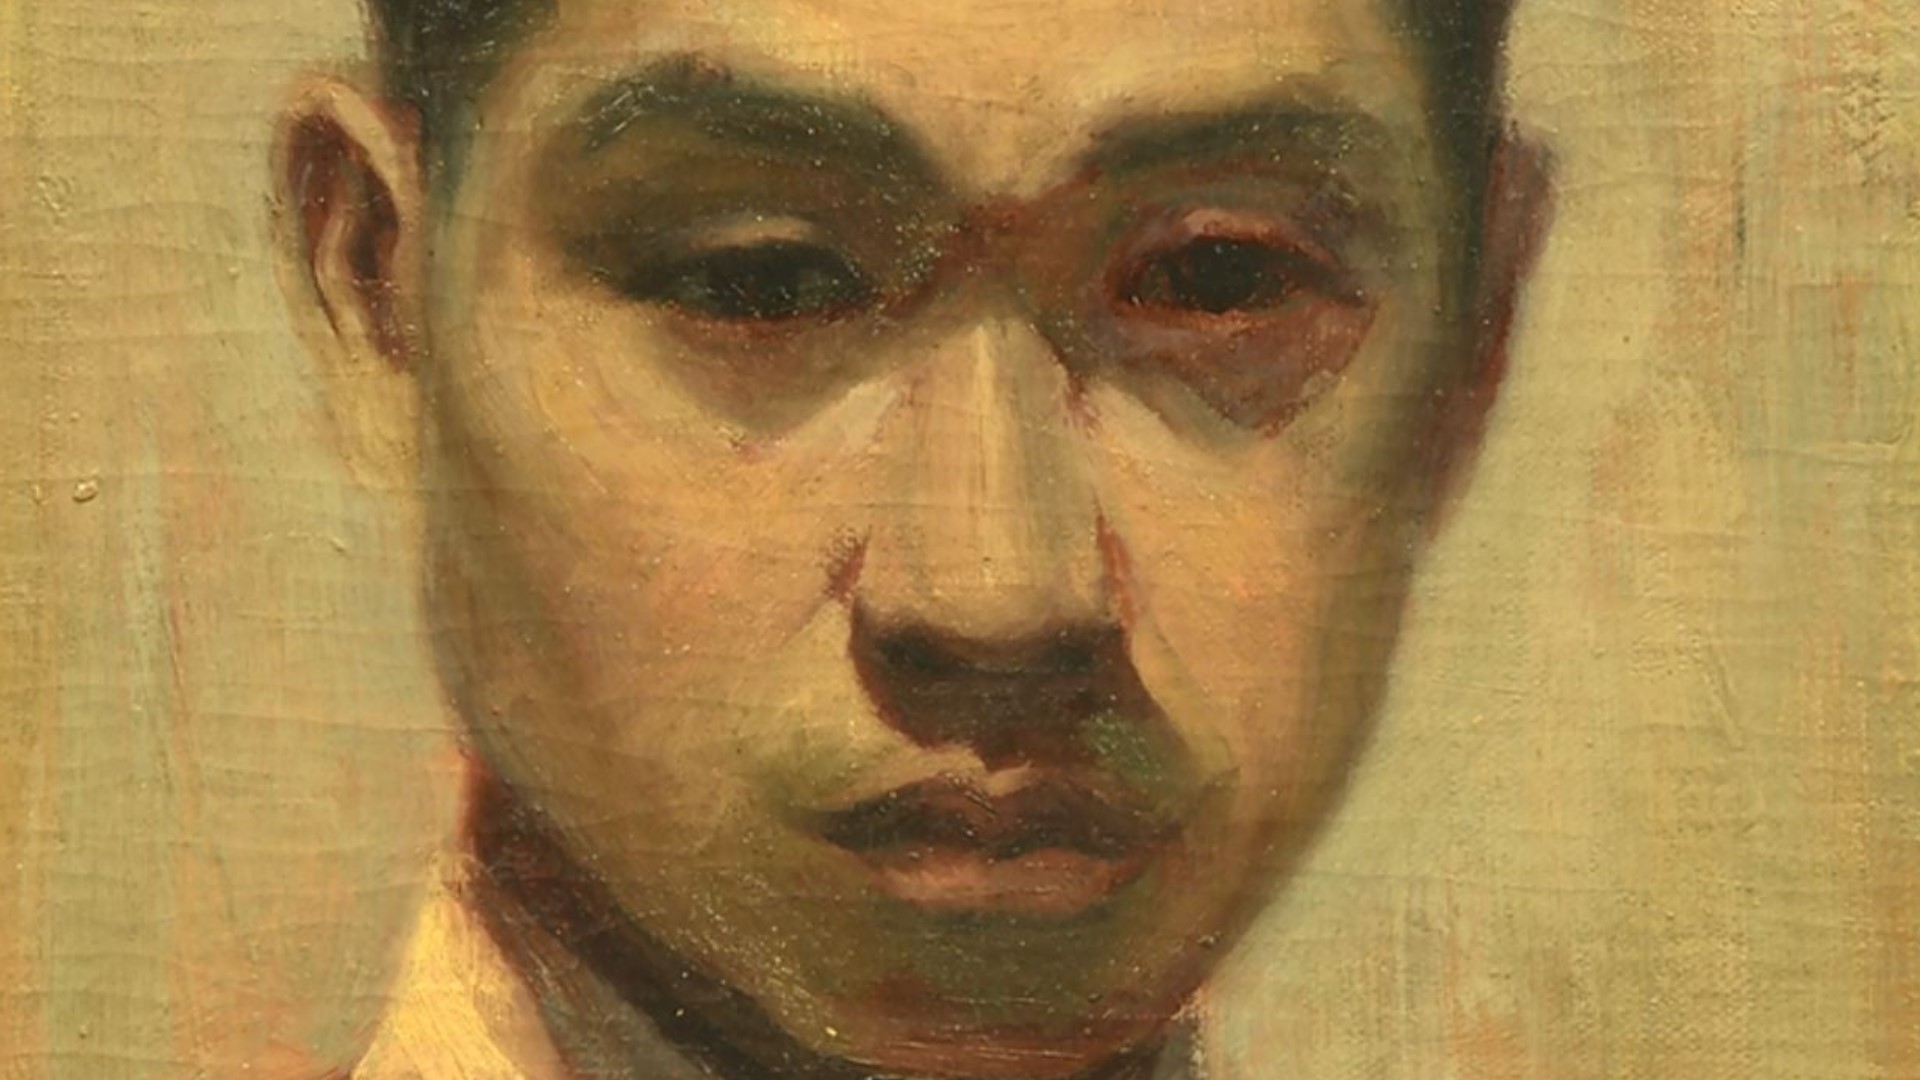 Kenjiro Nomura's fine art spanned 40 years and persevered through personal tragedy. #k5evening